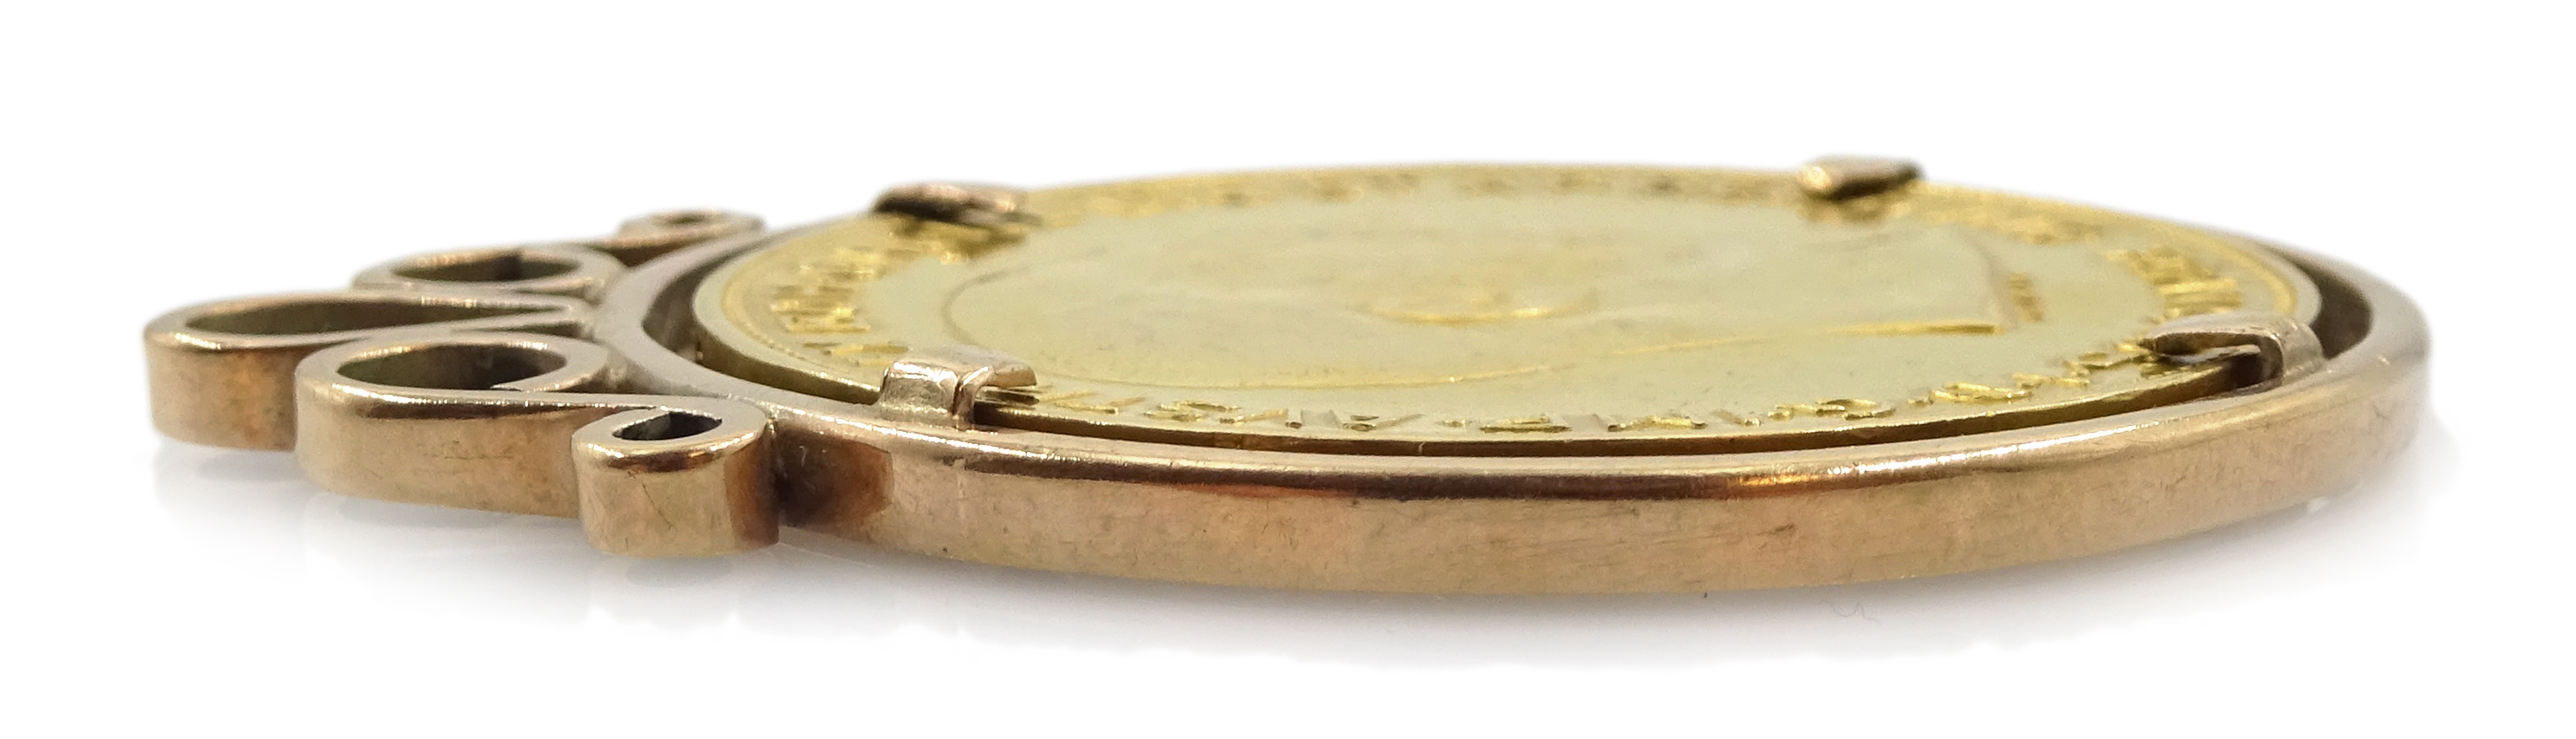 Austrian 1915 re-strike gold 100 corona coin, in a 9ct gold (tested) mount, total weight 41.2 grams - Image 3 of 3